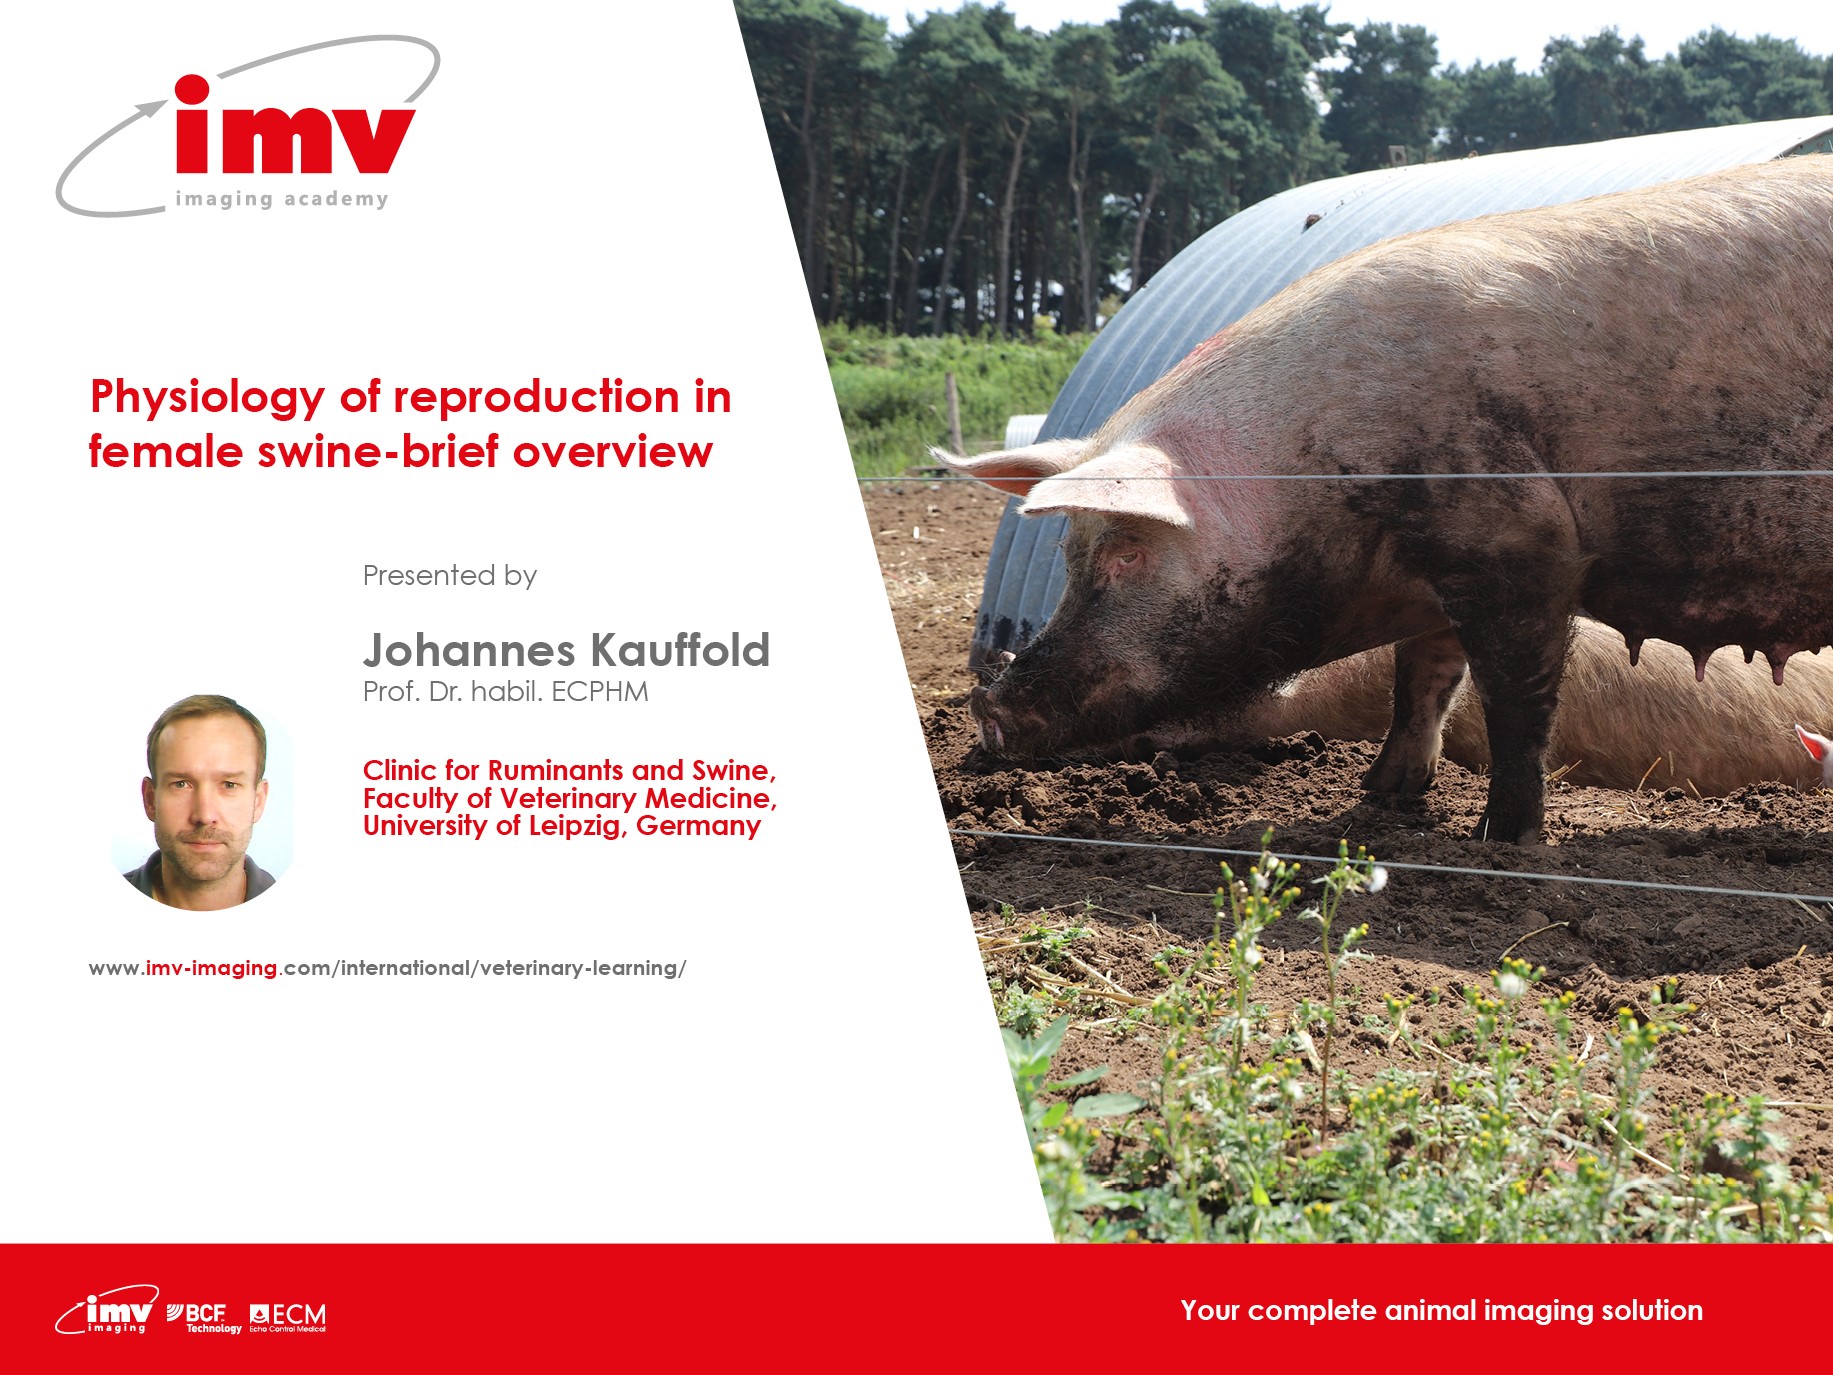 Webinar: Physiology of reproduction in female swine